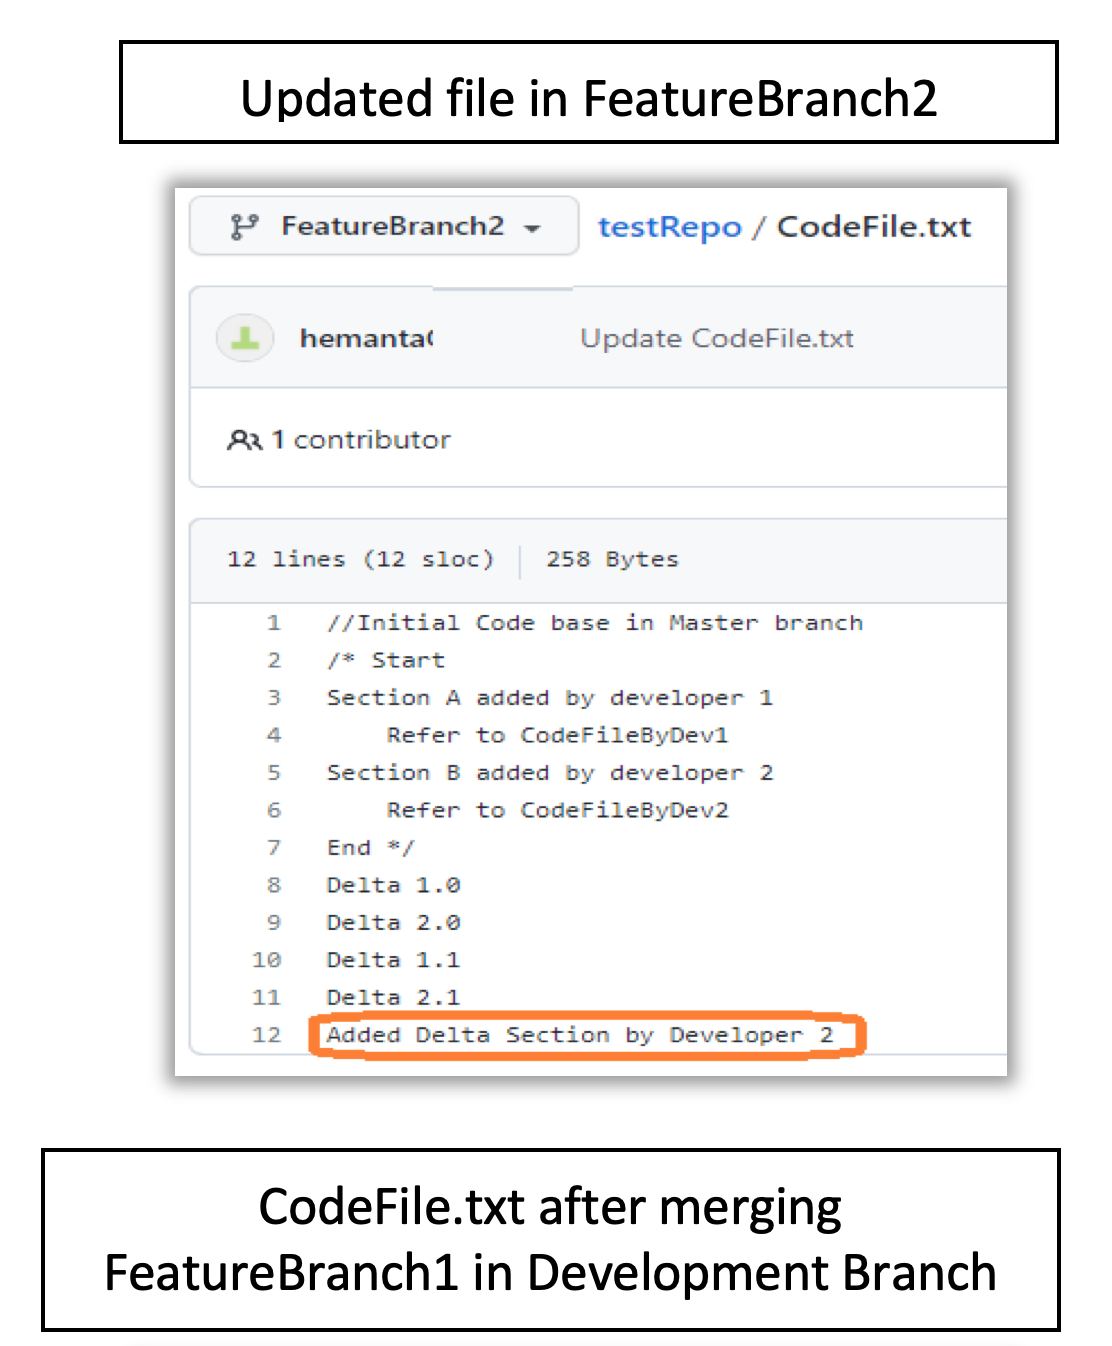 Picture 6 Merge conflicts and how to resolve them